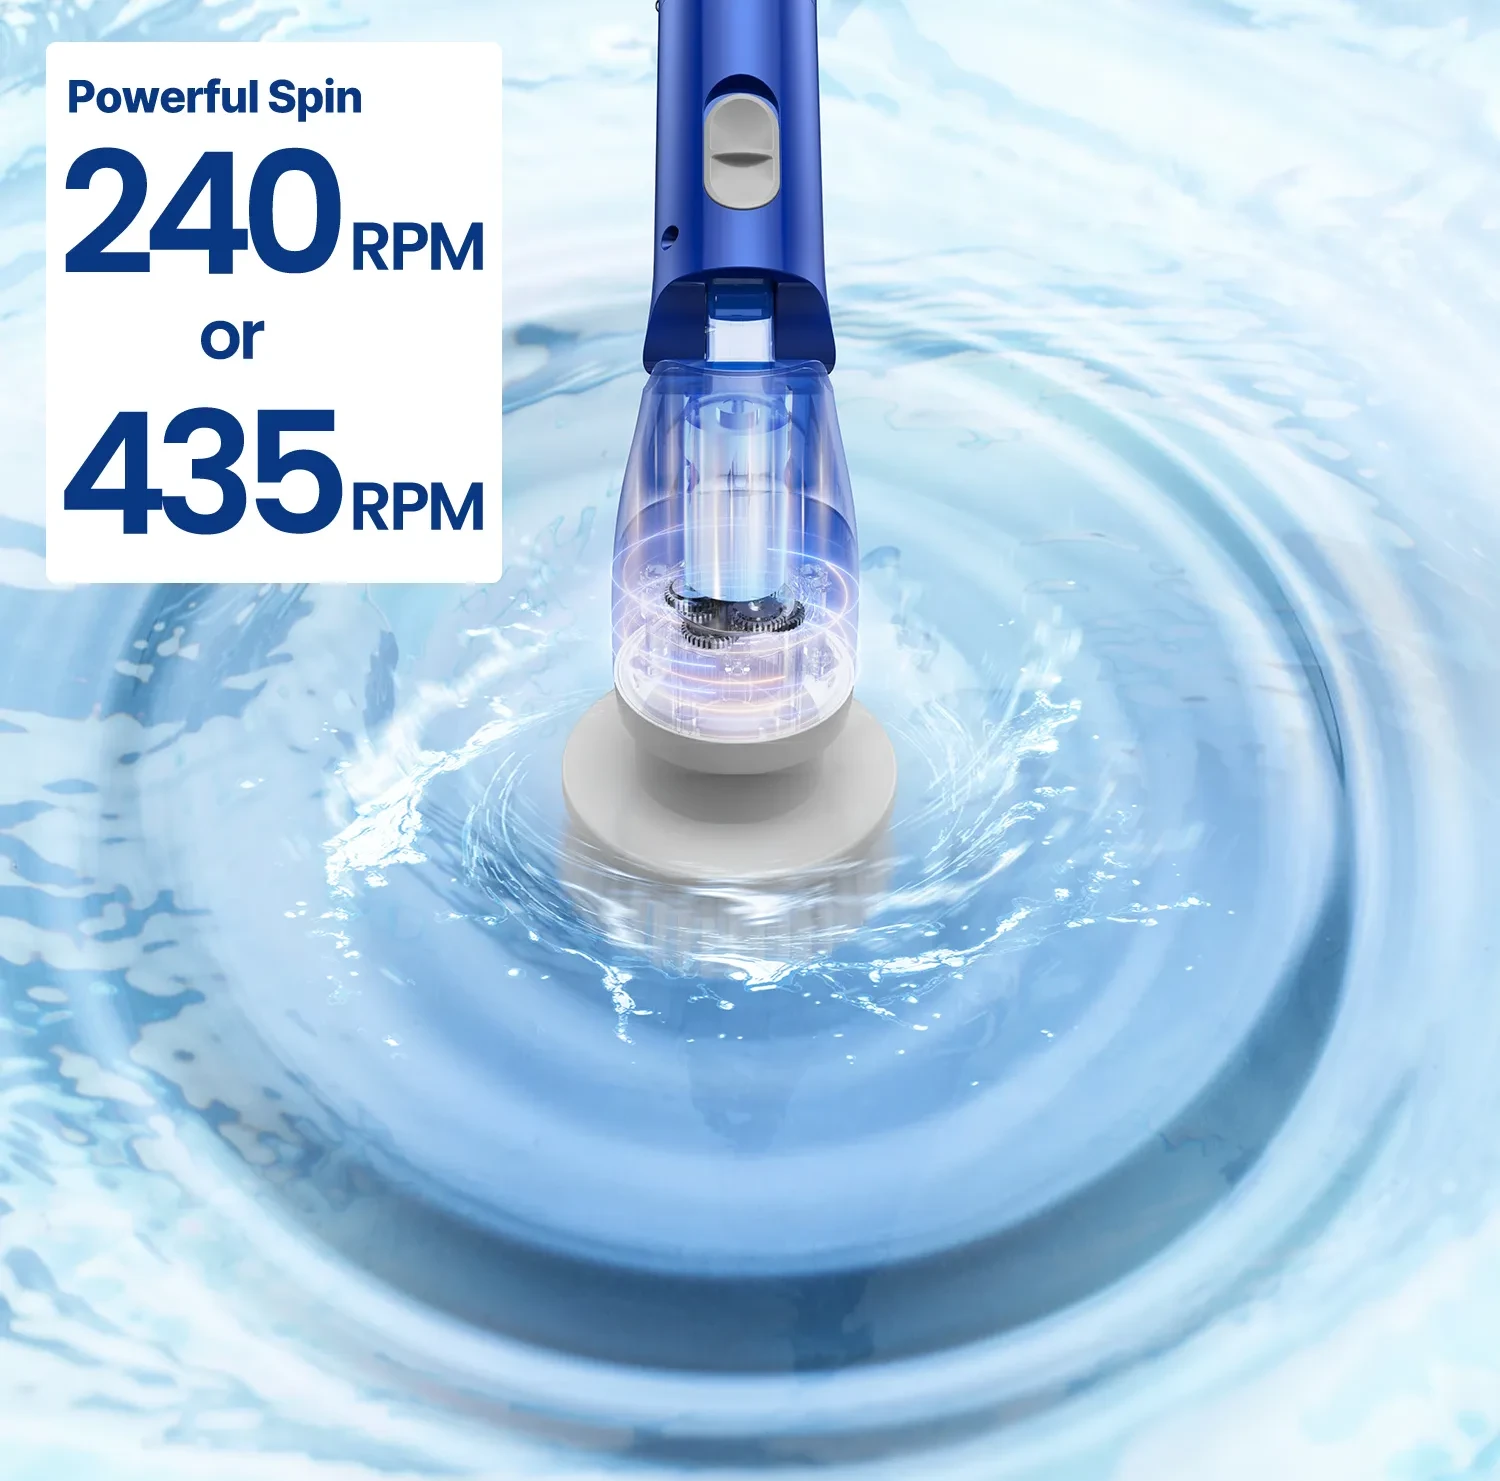 iDOO Electric Spin Scrubber, Cordless Shower Scrubber Bathroom Cleaning Brush with Adjustable Extension Handle for Bathtub, Tile, Floor, Size: 16.14L